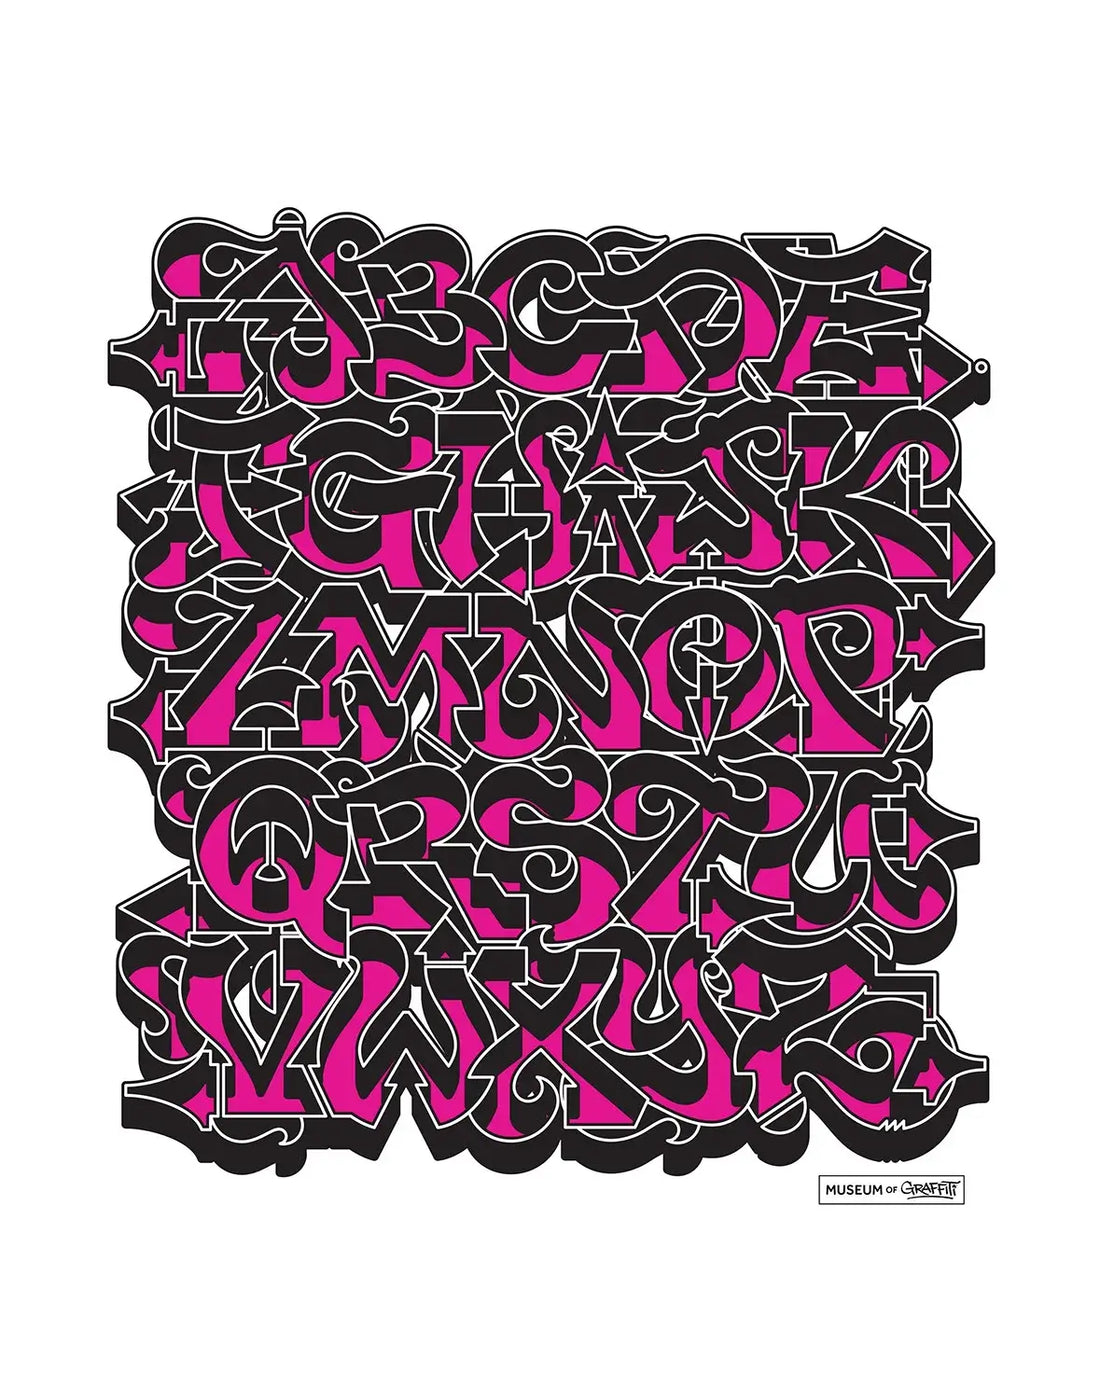 Our 3 Top Pics for Dope Graffiti Alphabets